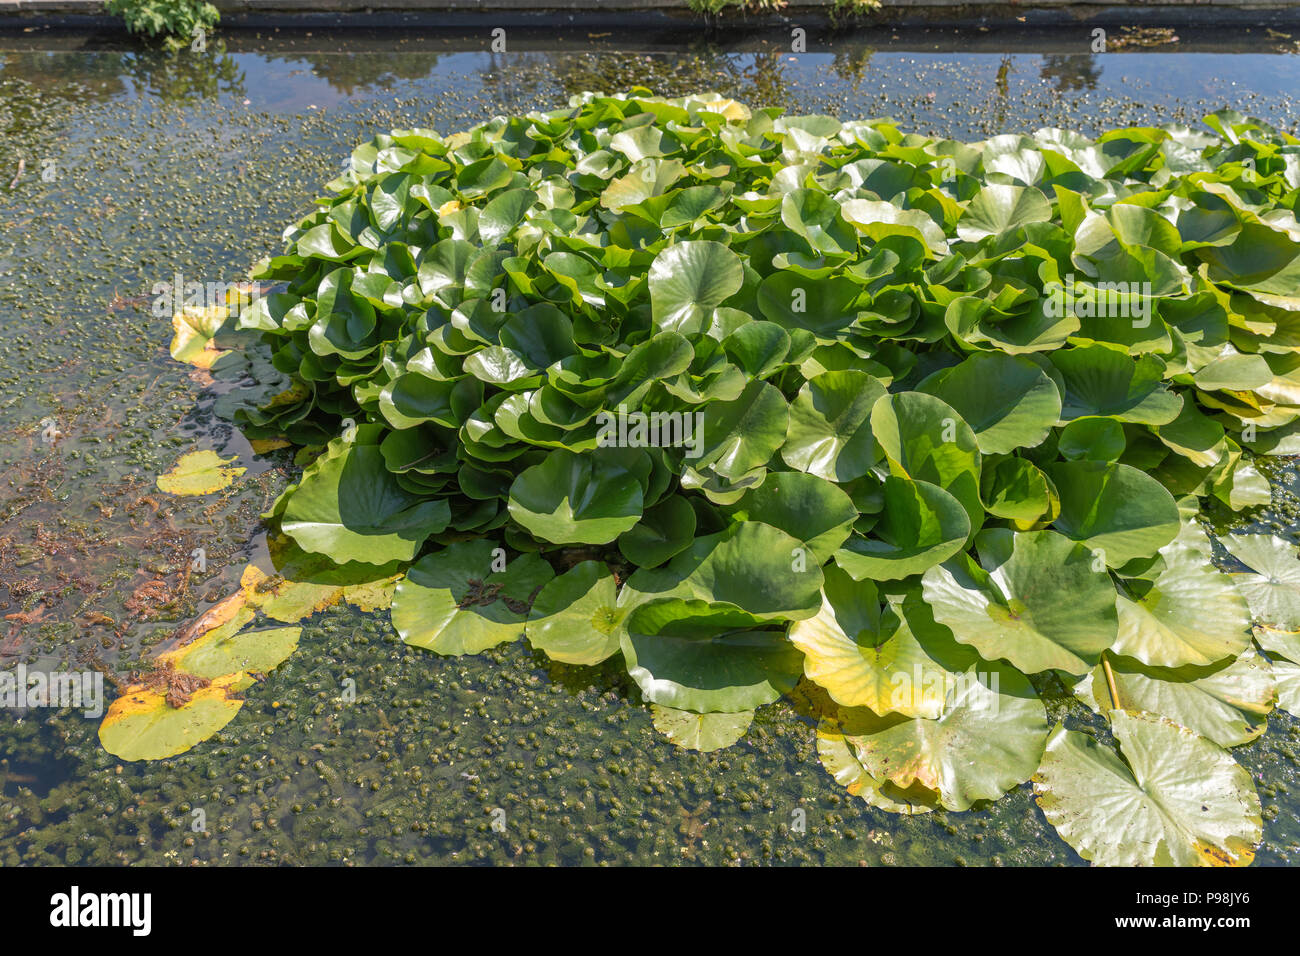 Garden Pond Lily Pads Stock Photo